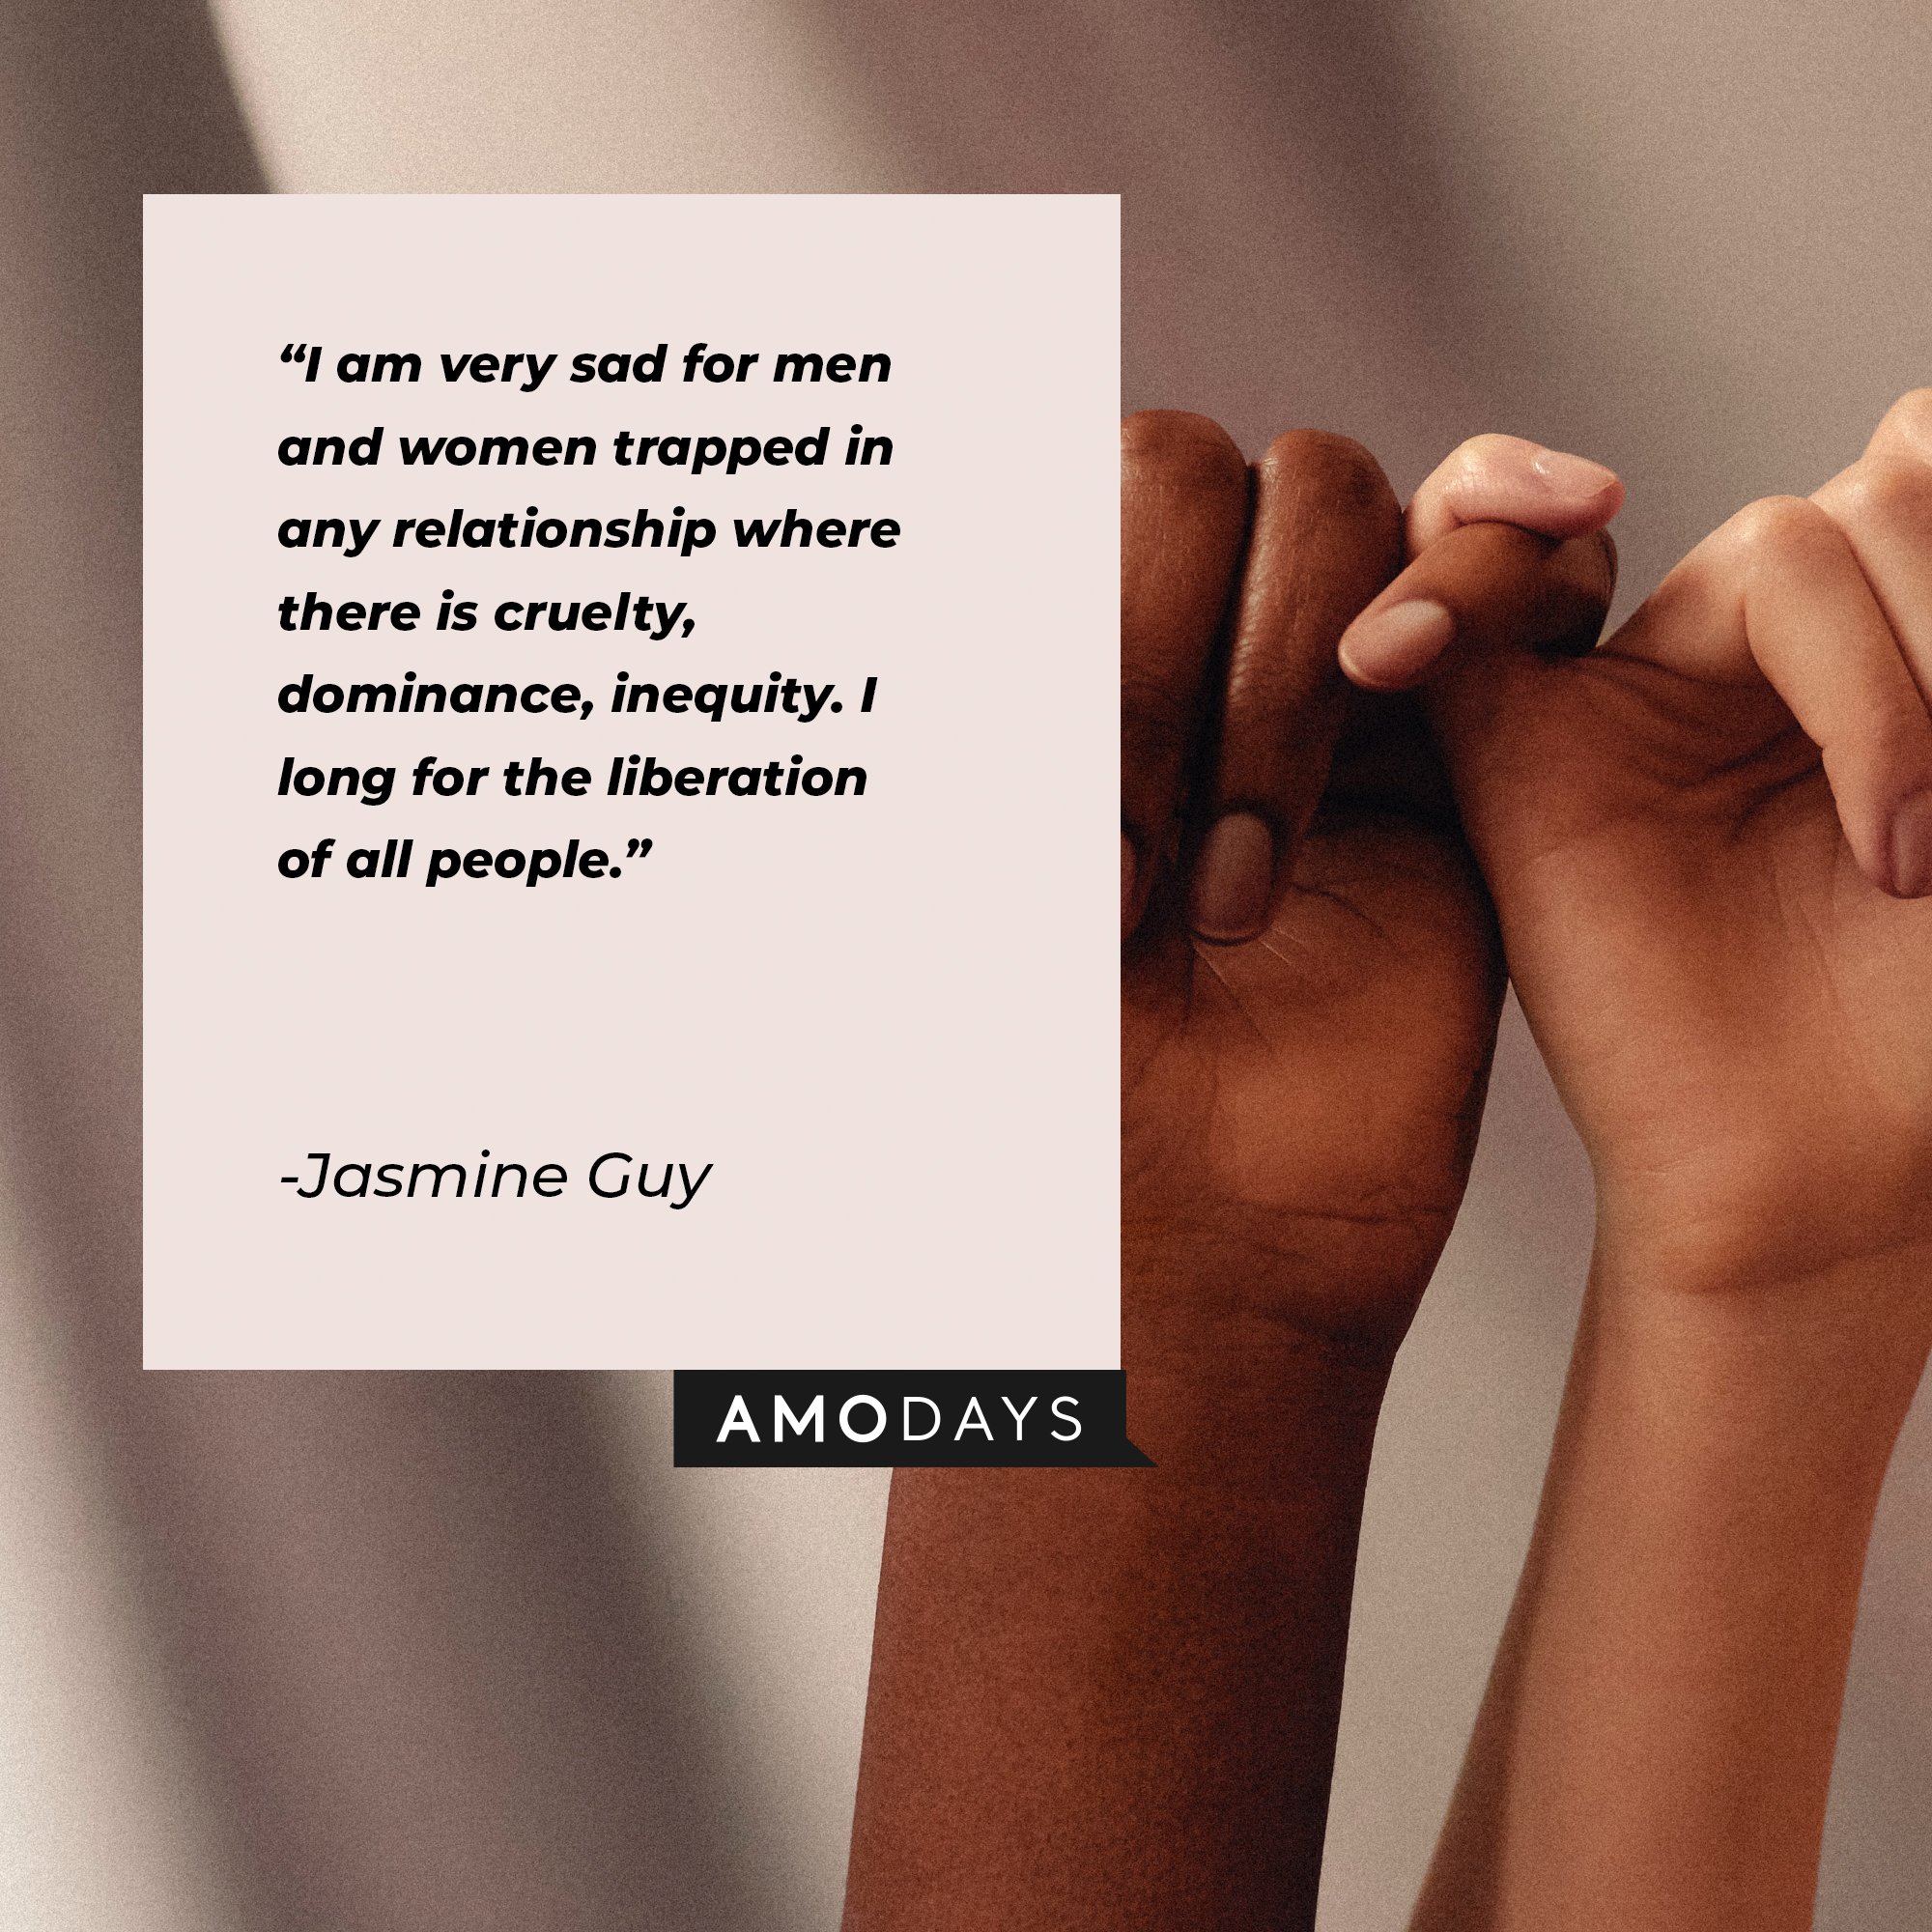 Jasmine Guy’s quote: "I am very sad for men and women trapped in any relationship where there is cruelty, dominance, inequity. I long for the liberation of all people." | Image: AmoDays